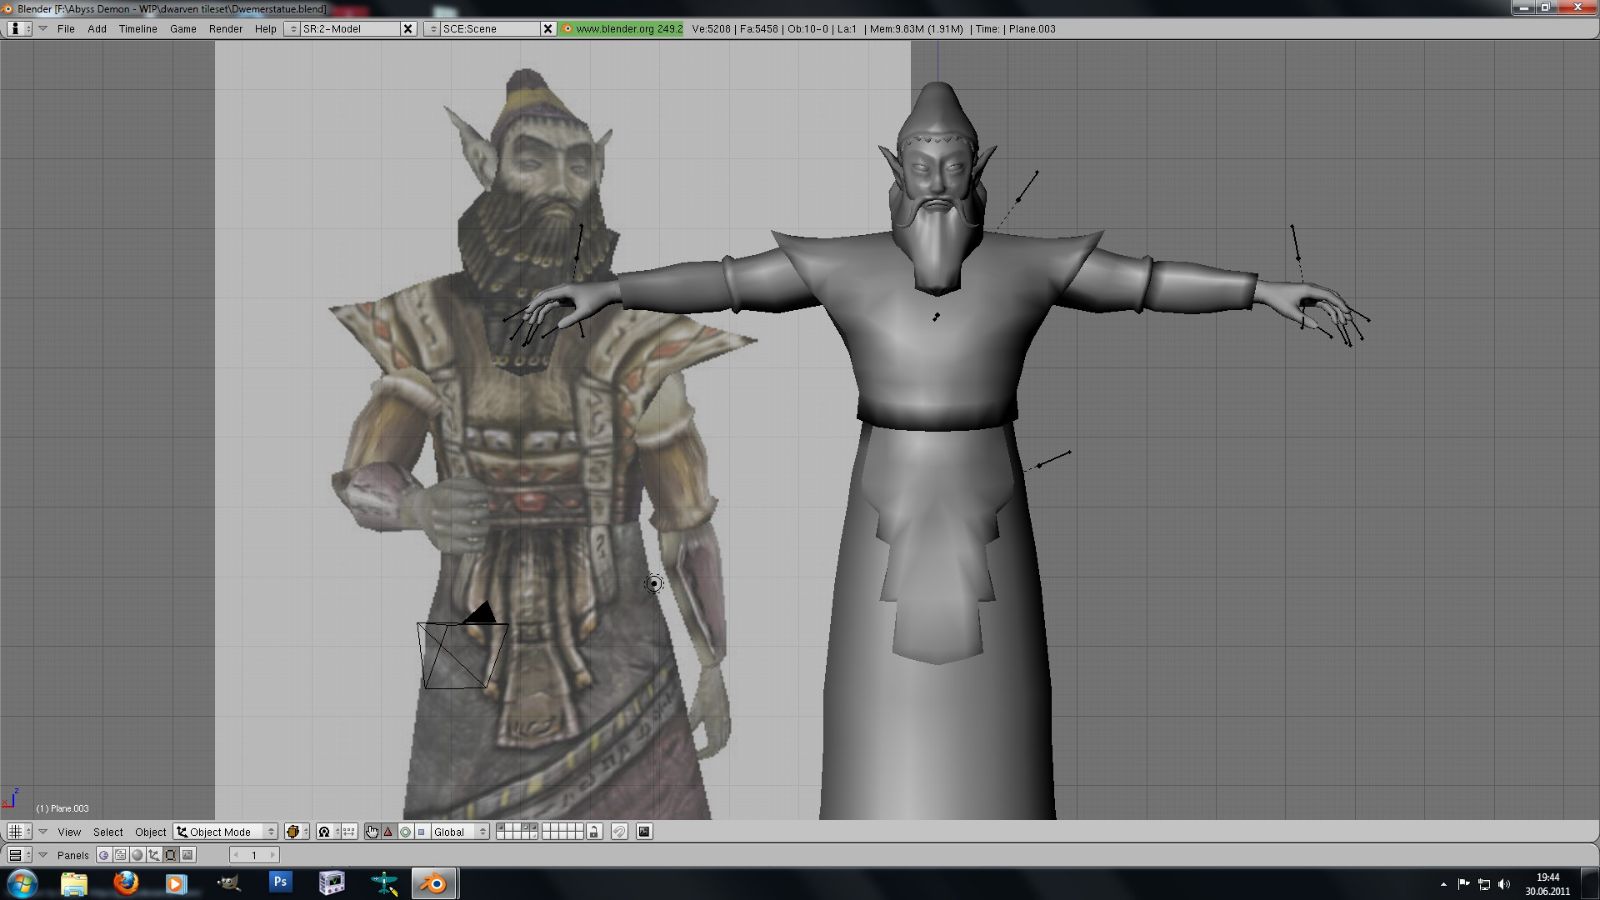 Dwemer Statue in Blender (using a render of a Dwarven Spectre from Morrowind as inspiration)